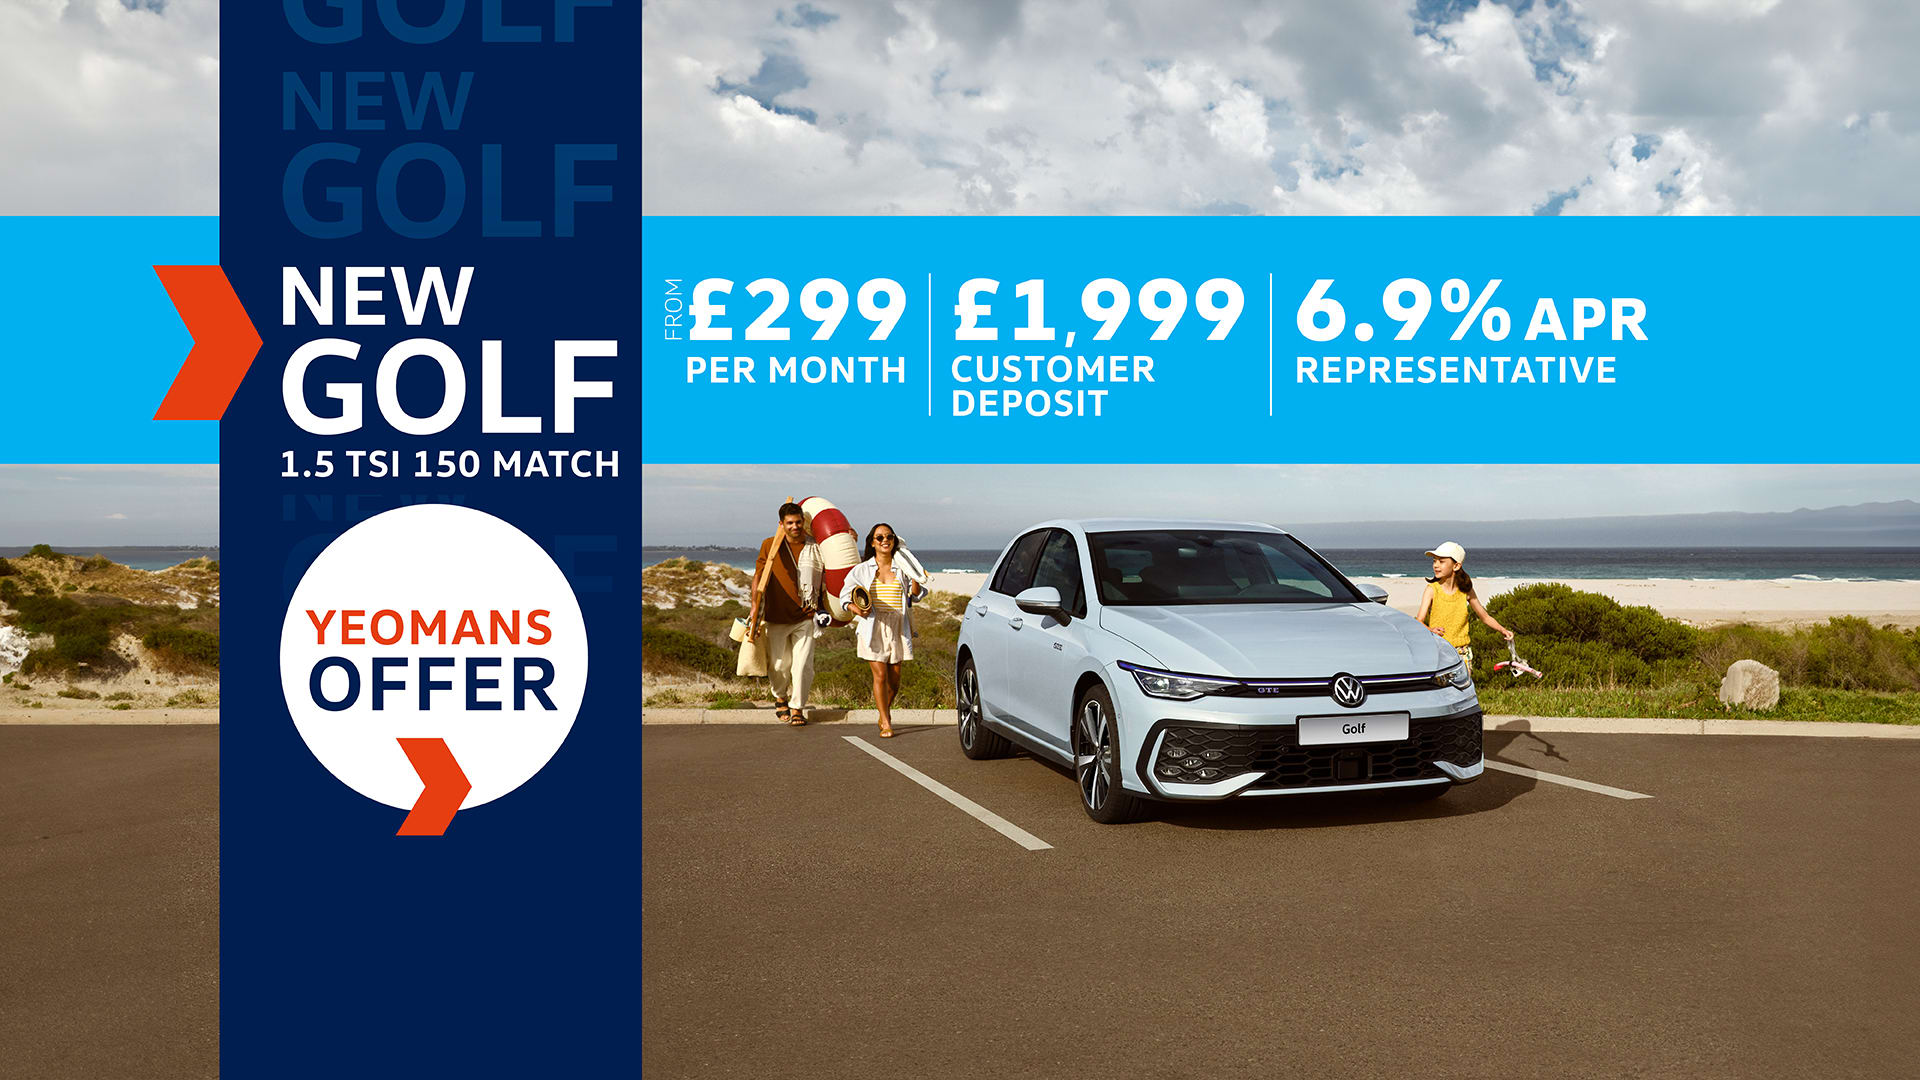 Yeomans Offer - New Golf